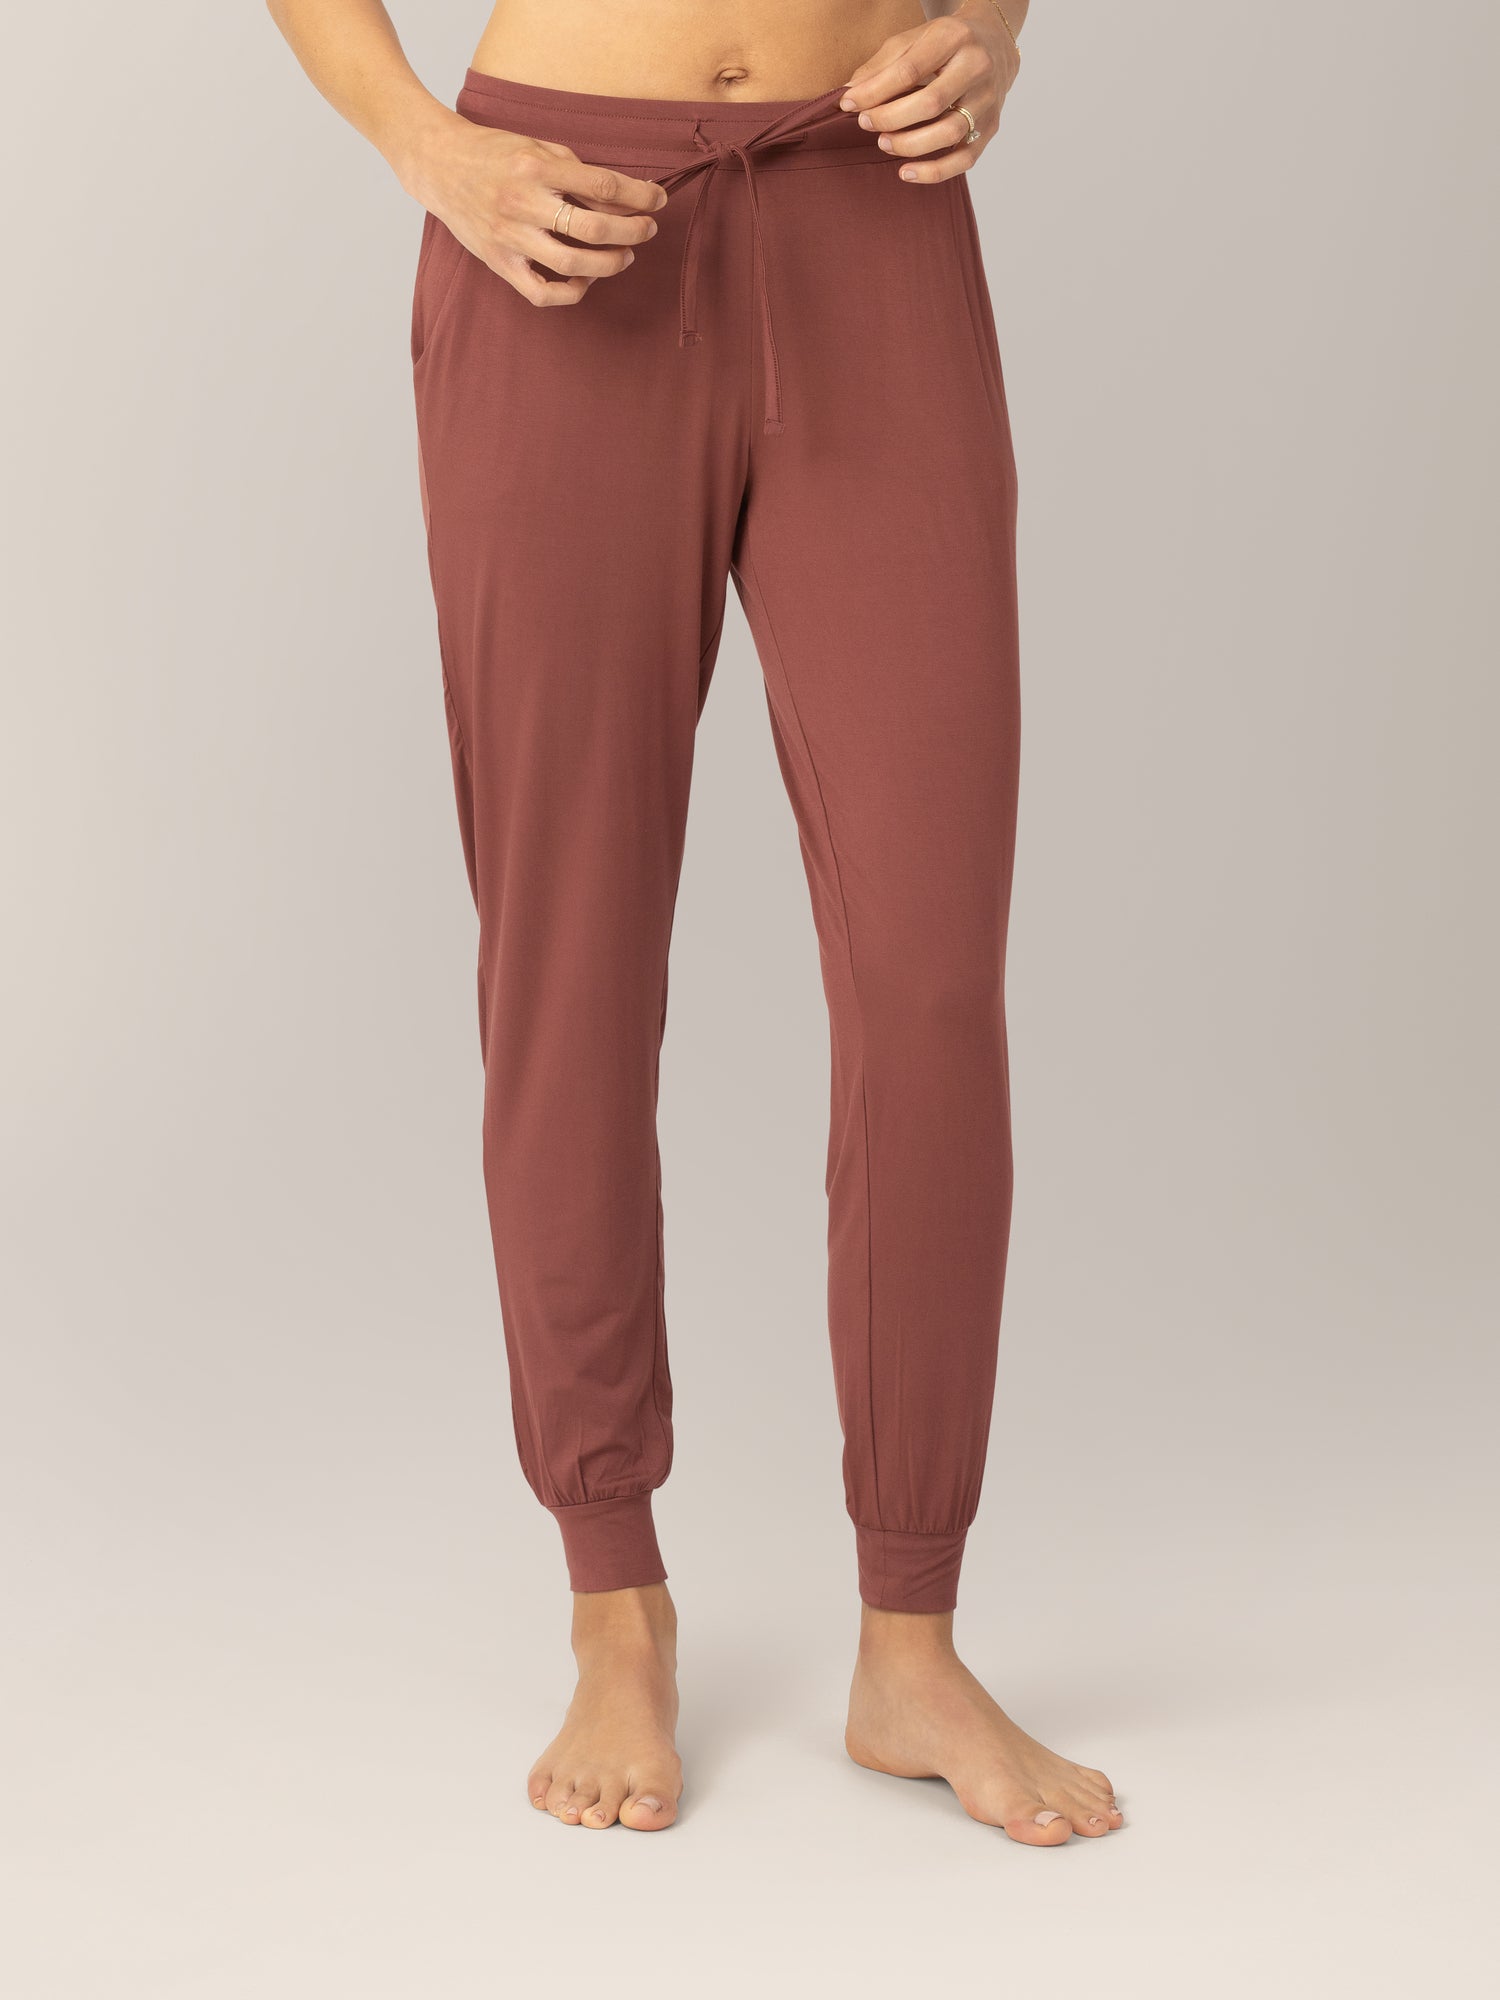 Close up front view of model wearing the Everyday Lounger Jogger in Redwood, showing the drawstring